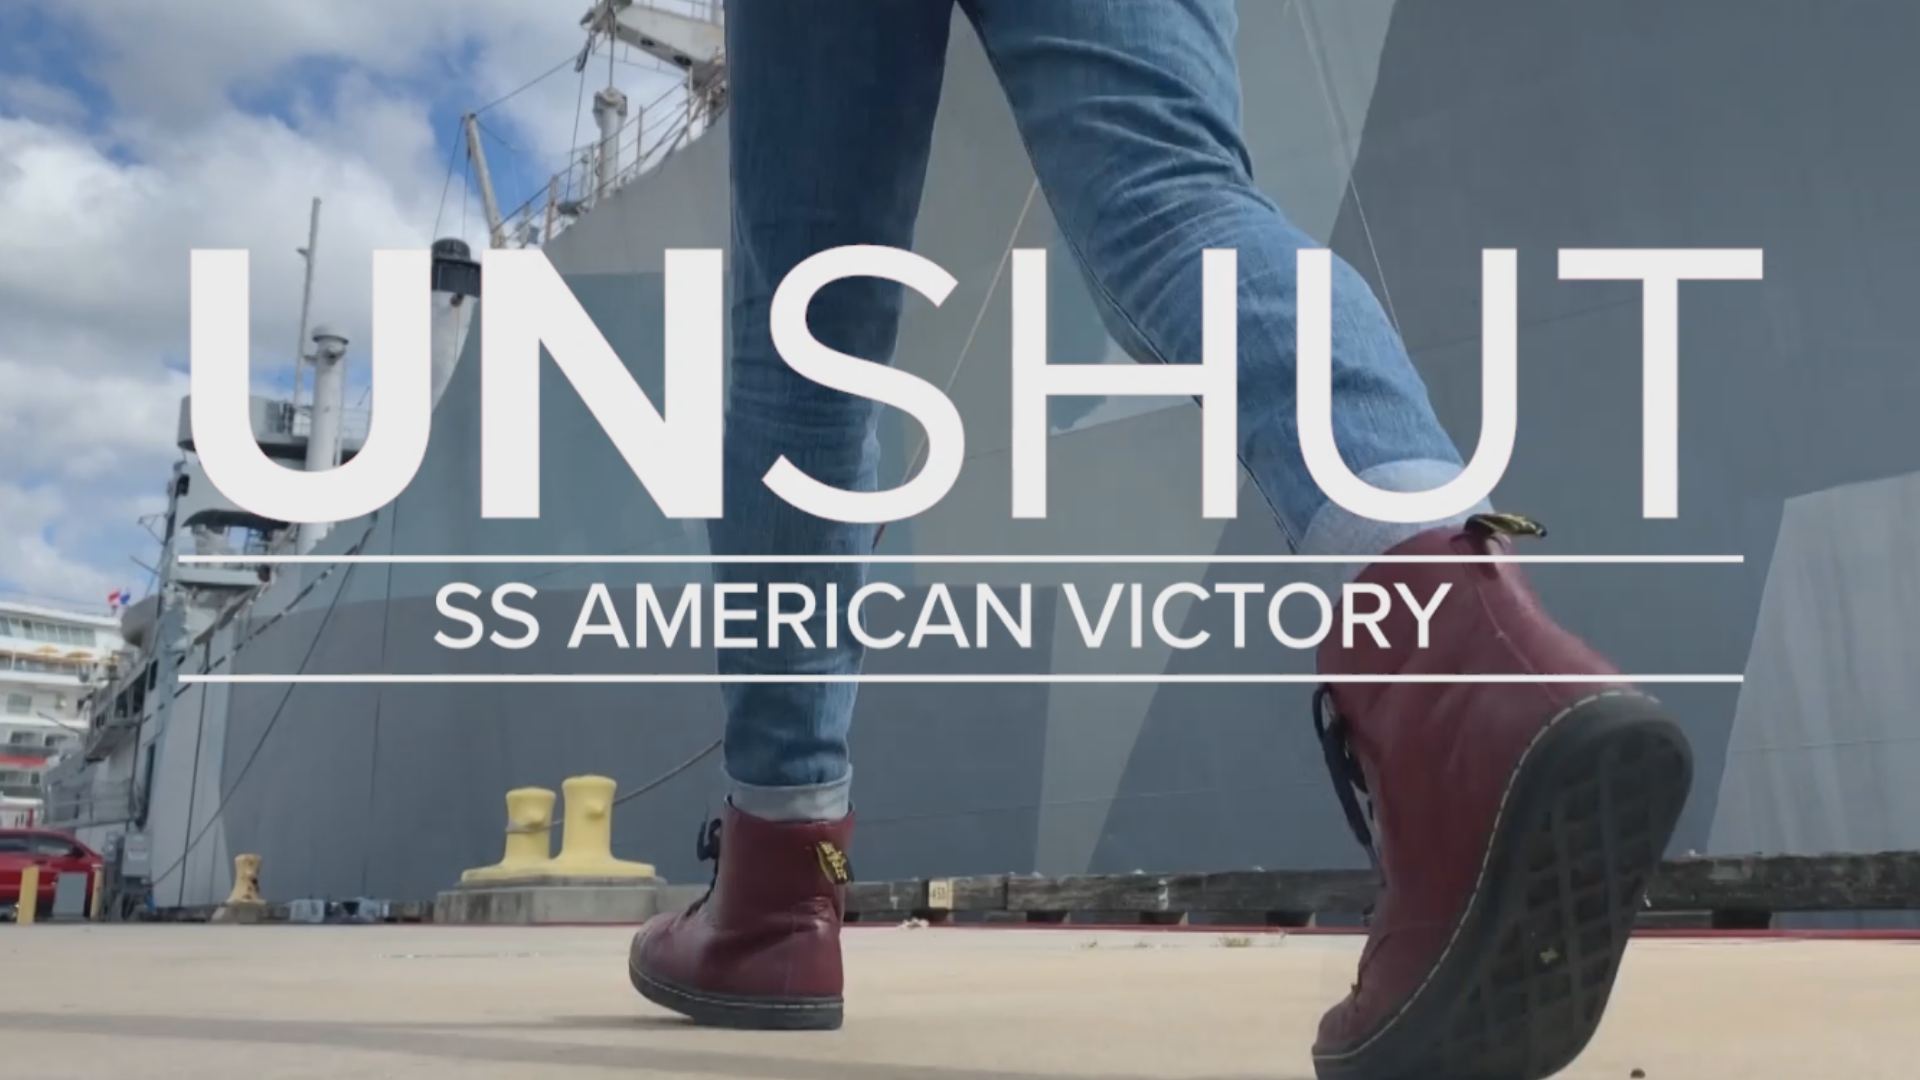 UnShut - A new series where 10News Digital unlocks doors you just can't get into. In this episode, we get access to restricted areas aboard the SS American Victory.